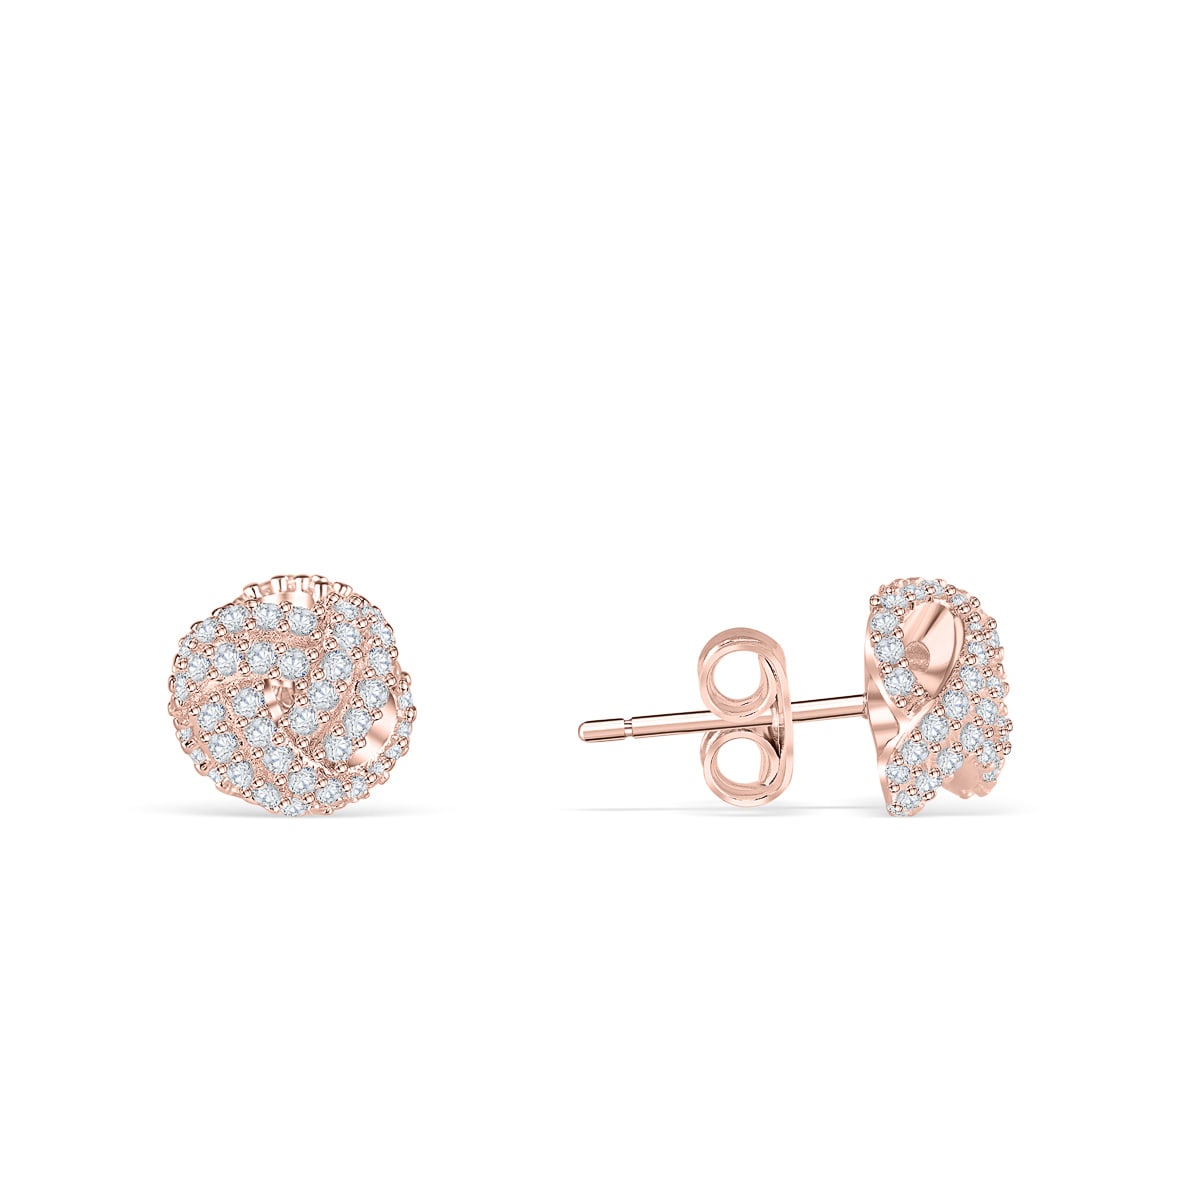 the audrey rose gold knot earrings